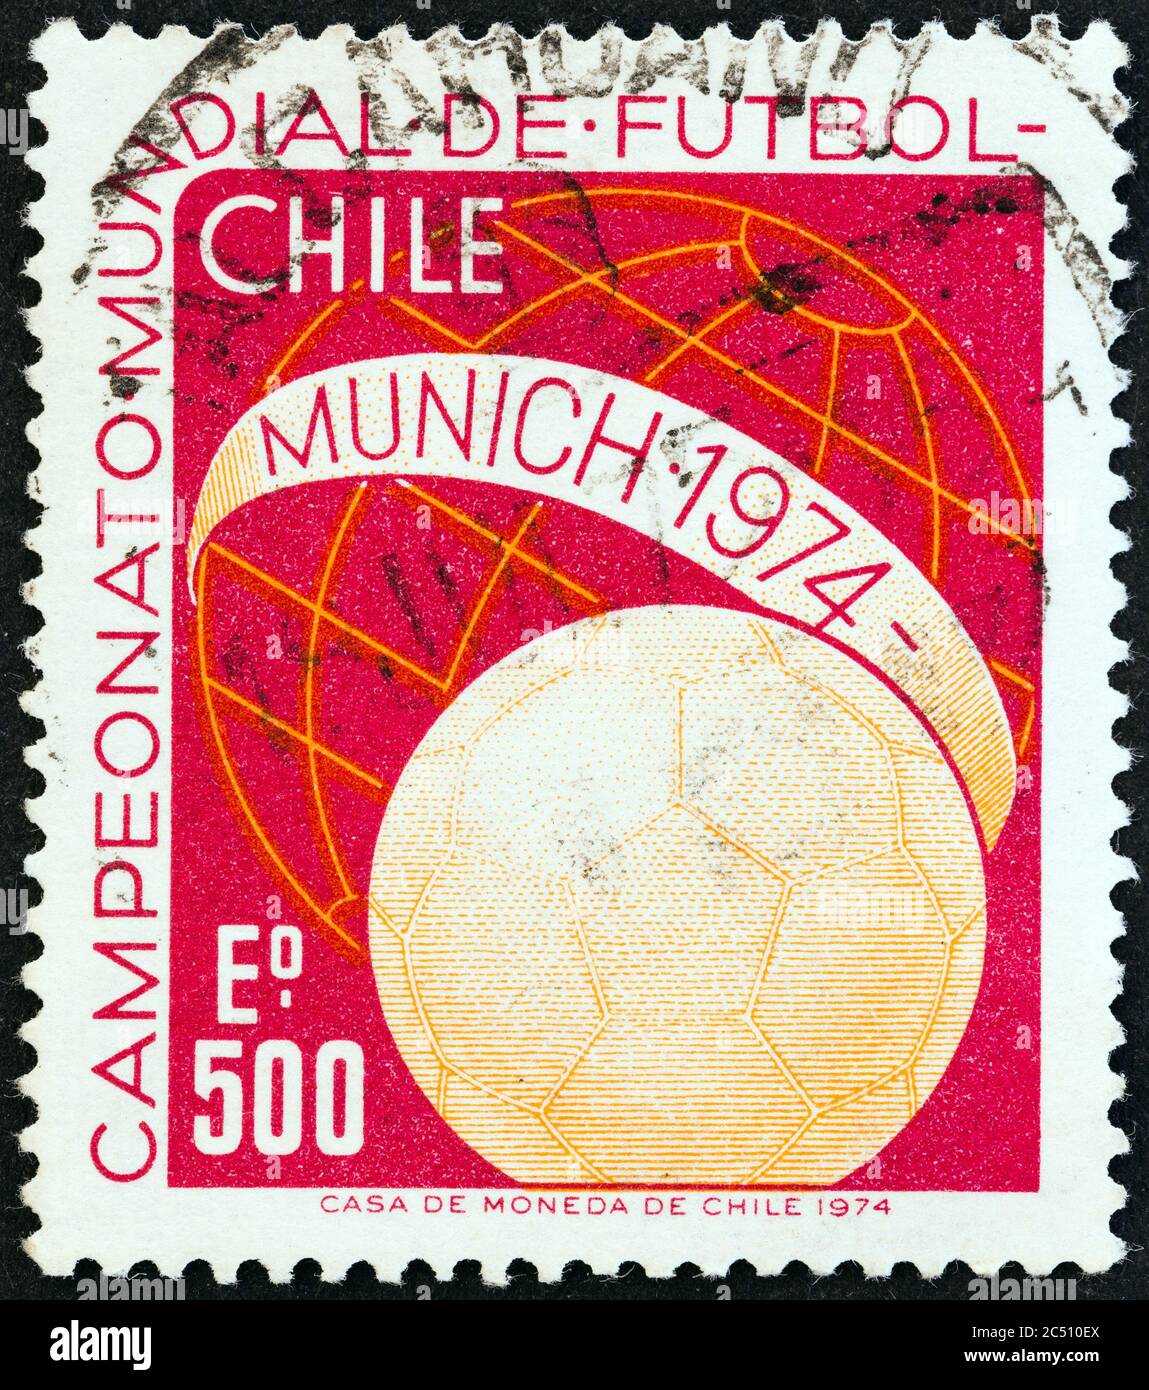 CHILE - CIRCA 1974: A stamp printed in Chile from the "World Cup Football Championships, West Germany" issue shows ball and Globe, circa 1974. Stock Photo